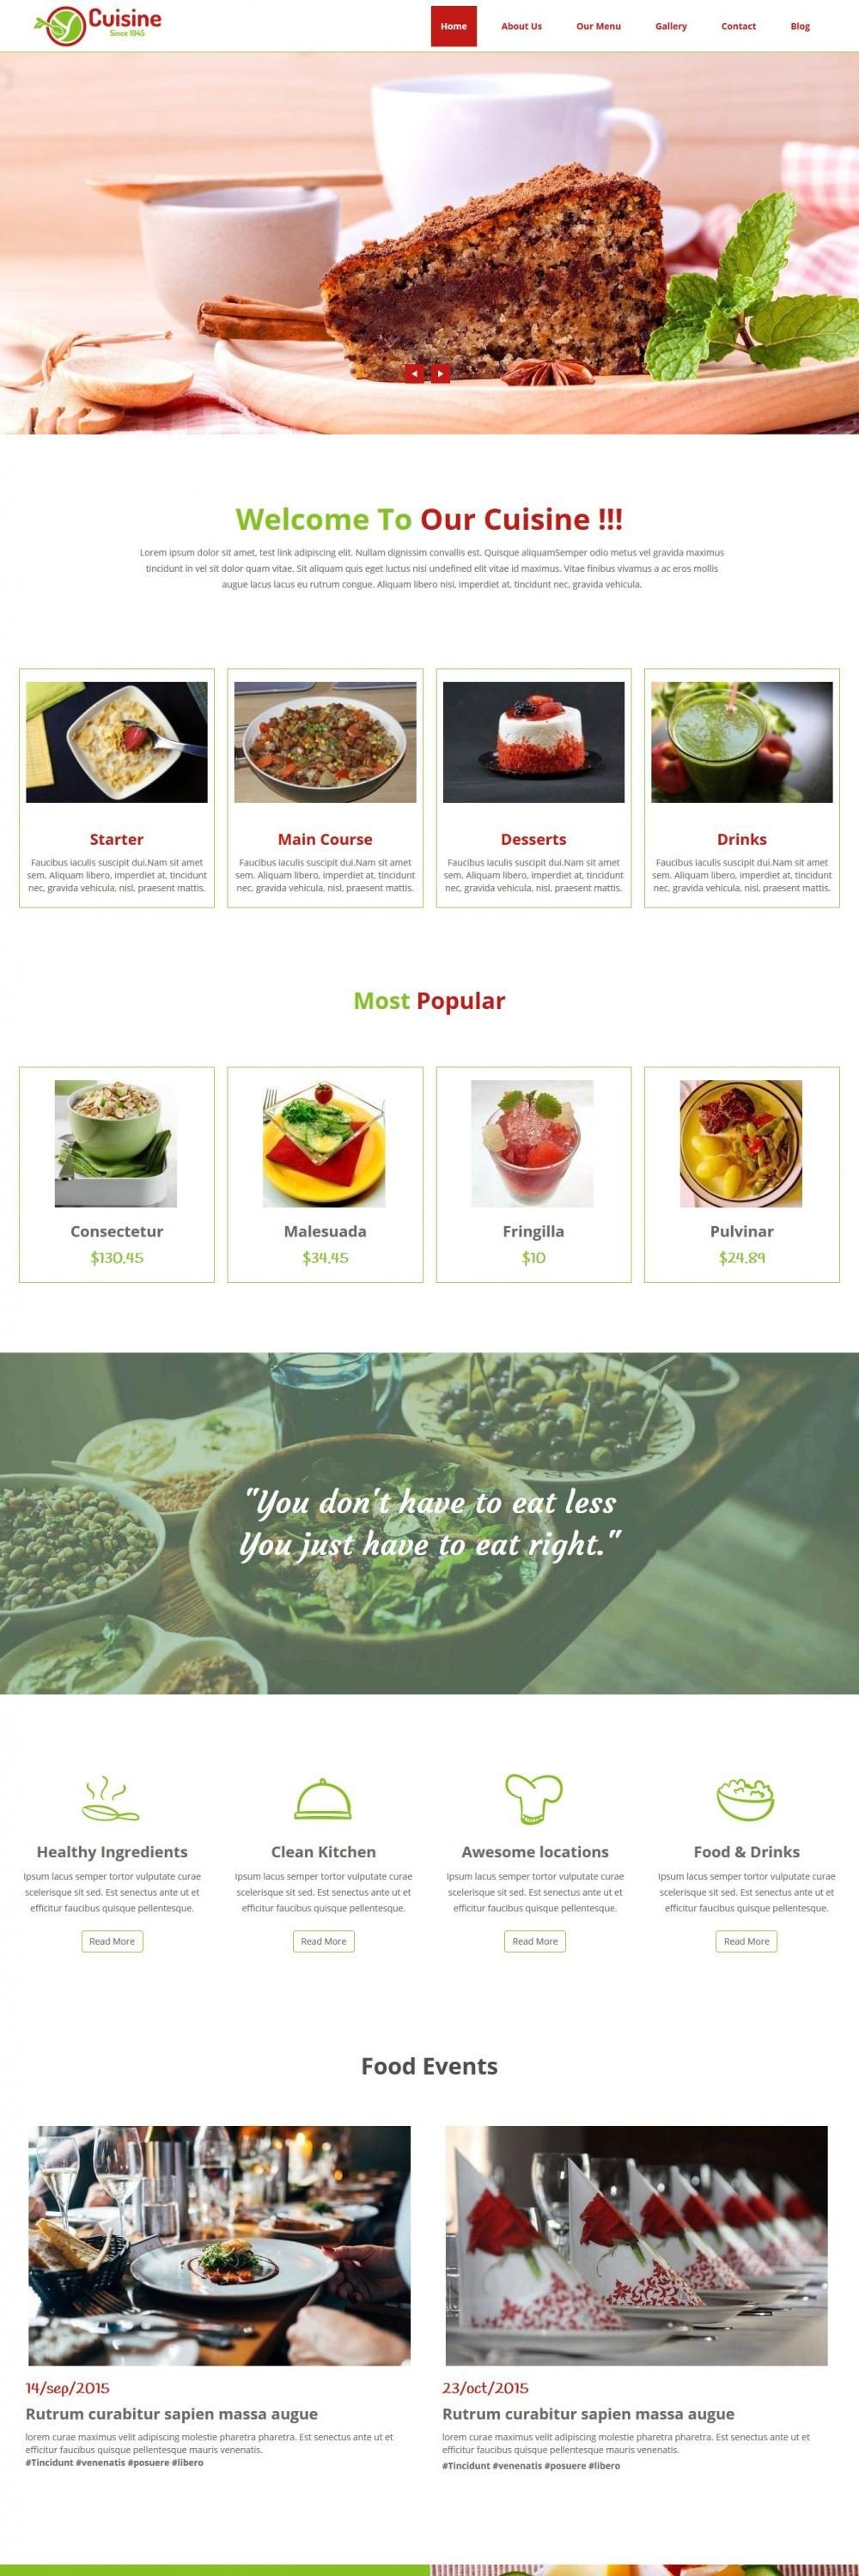 Cuisine Cafe - Restaurant and Cafe WordPress Theme